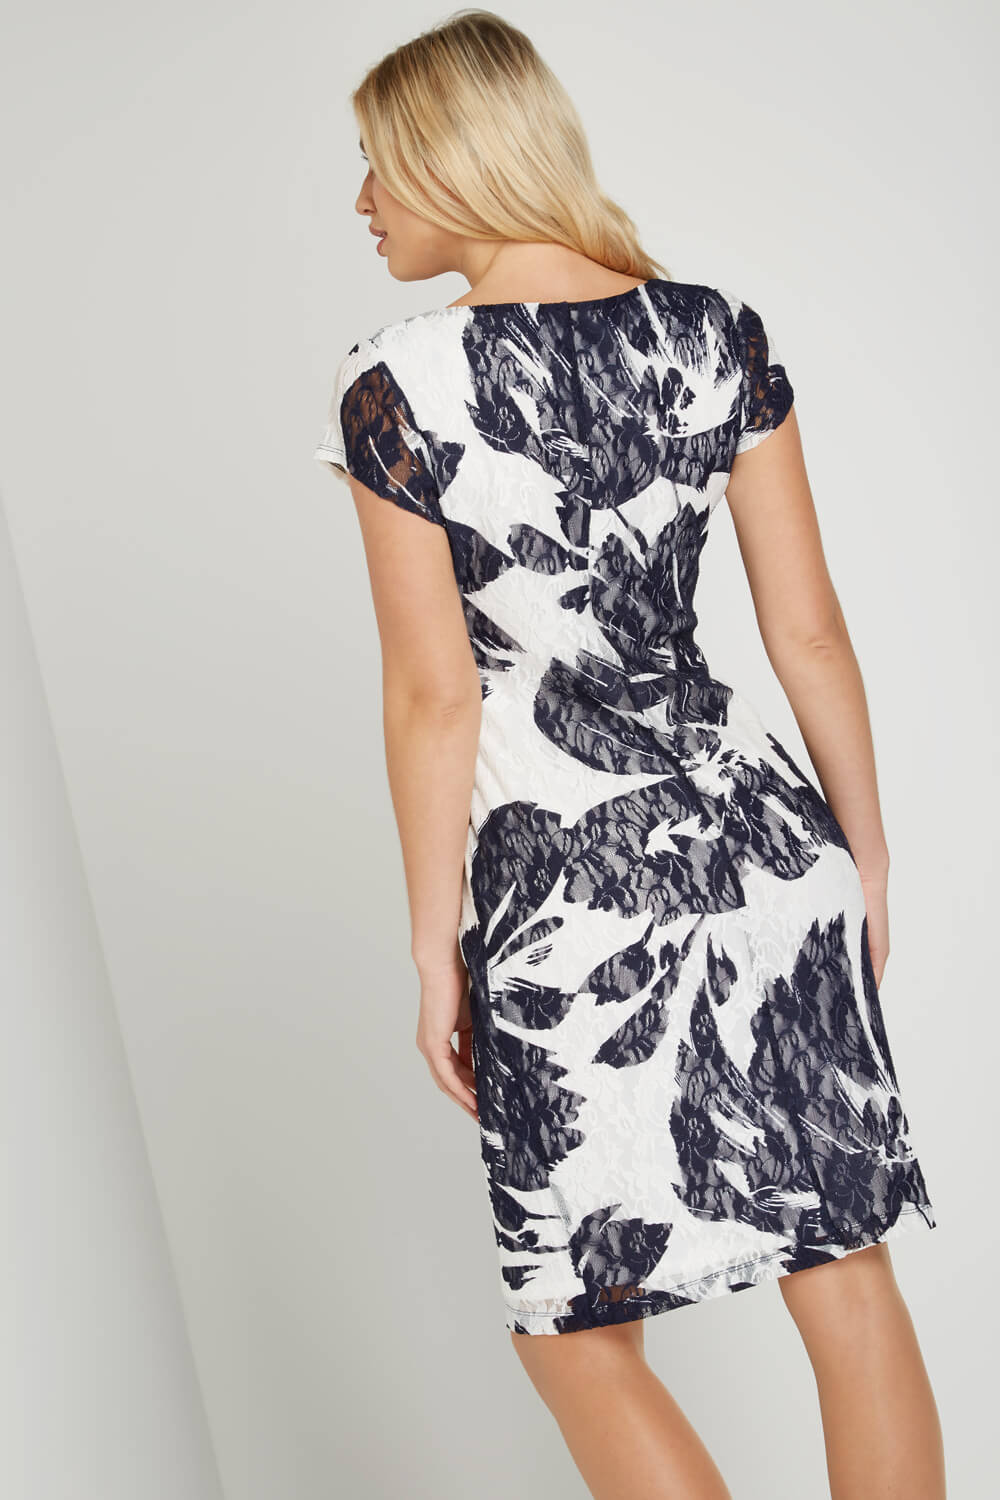  Floral Print Lace Ruched Dress, Image 2 of 4